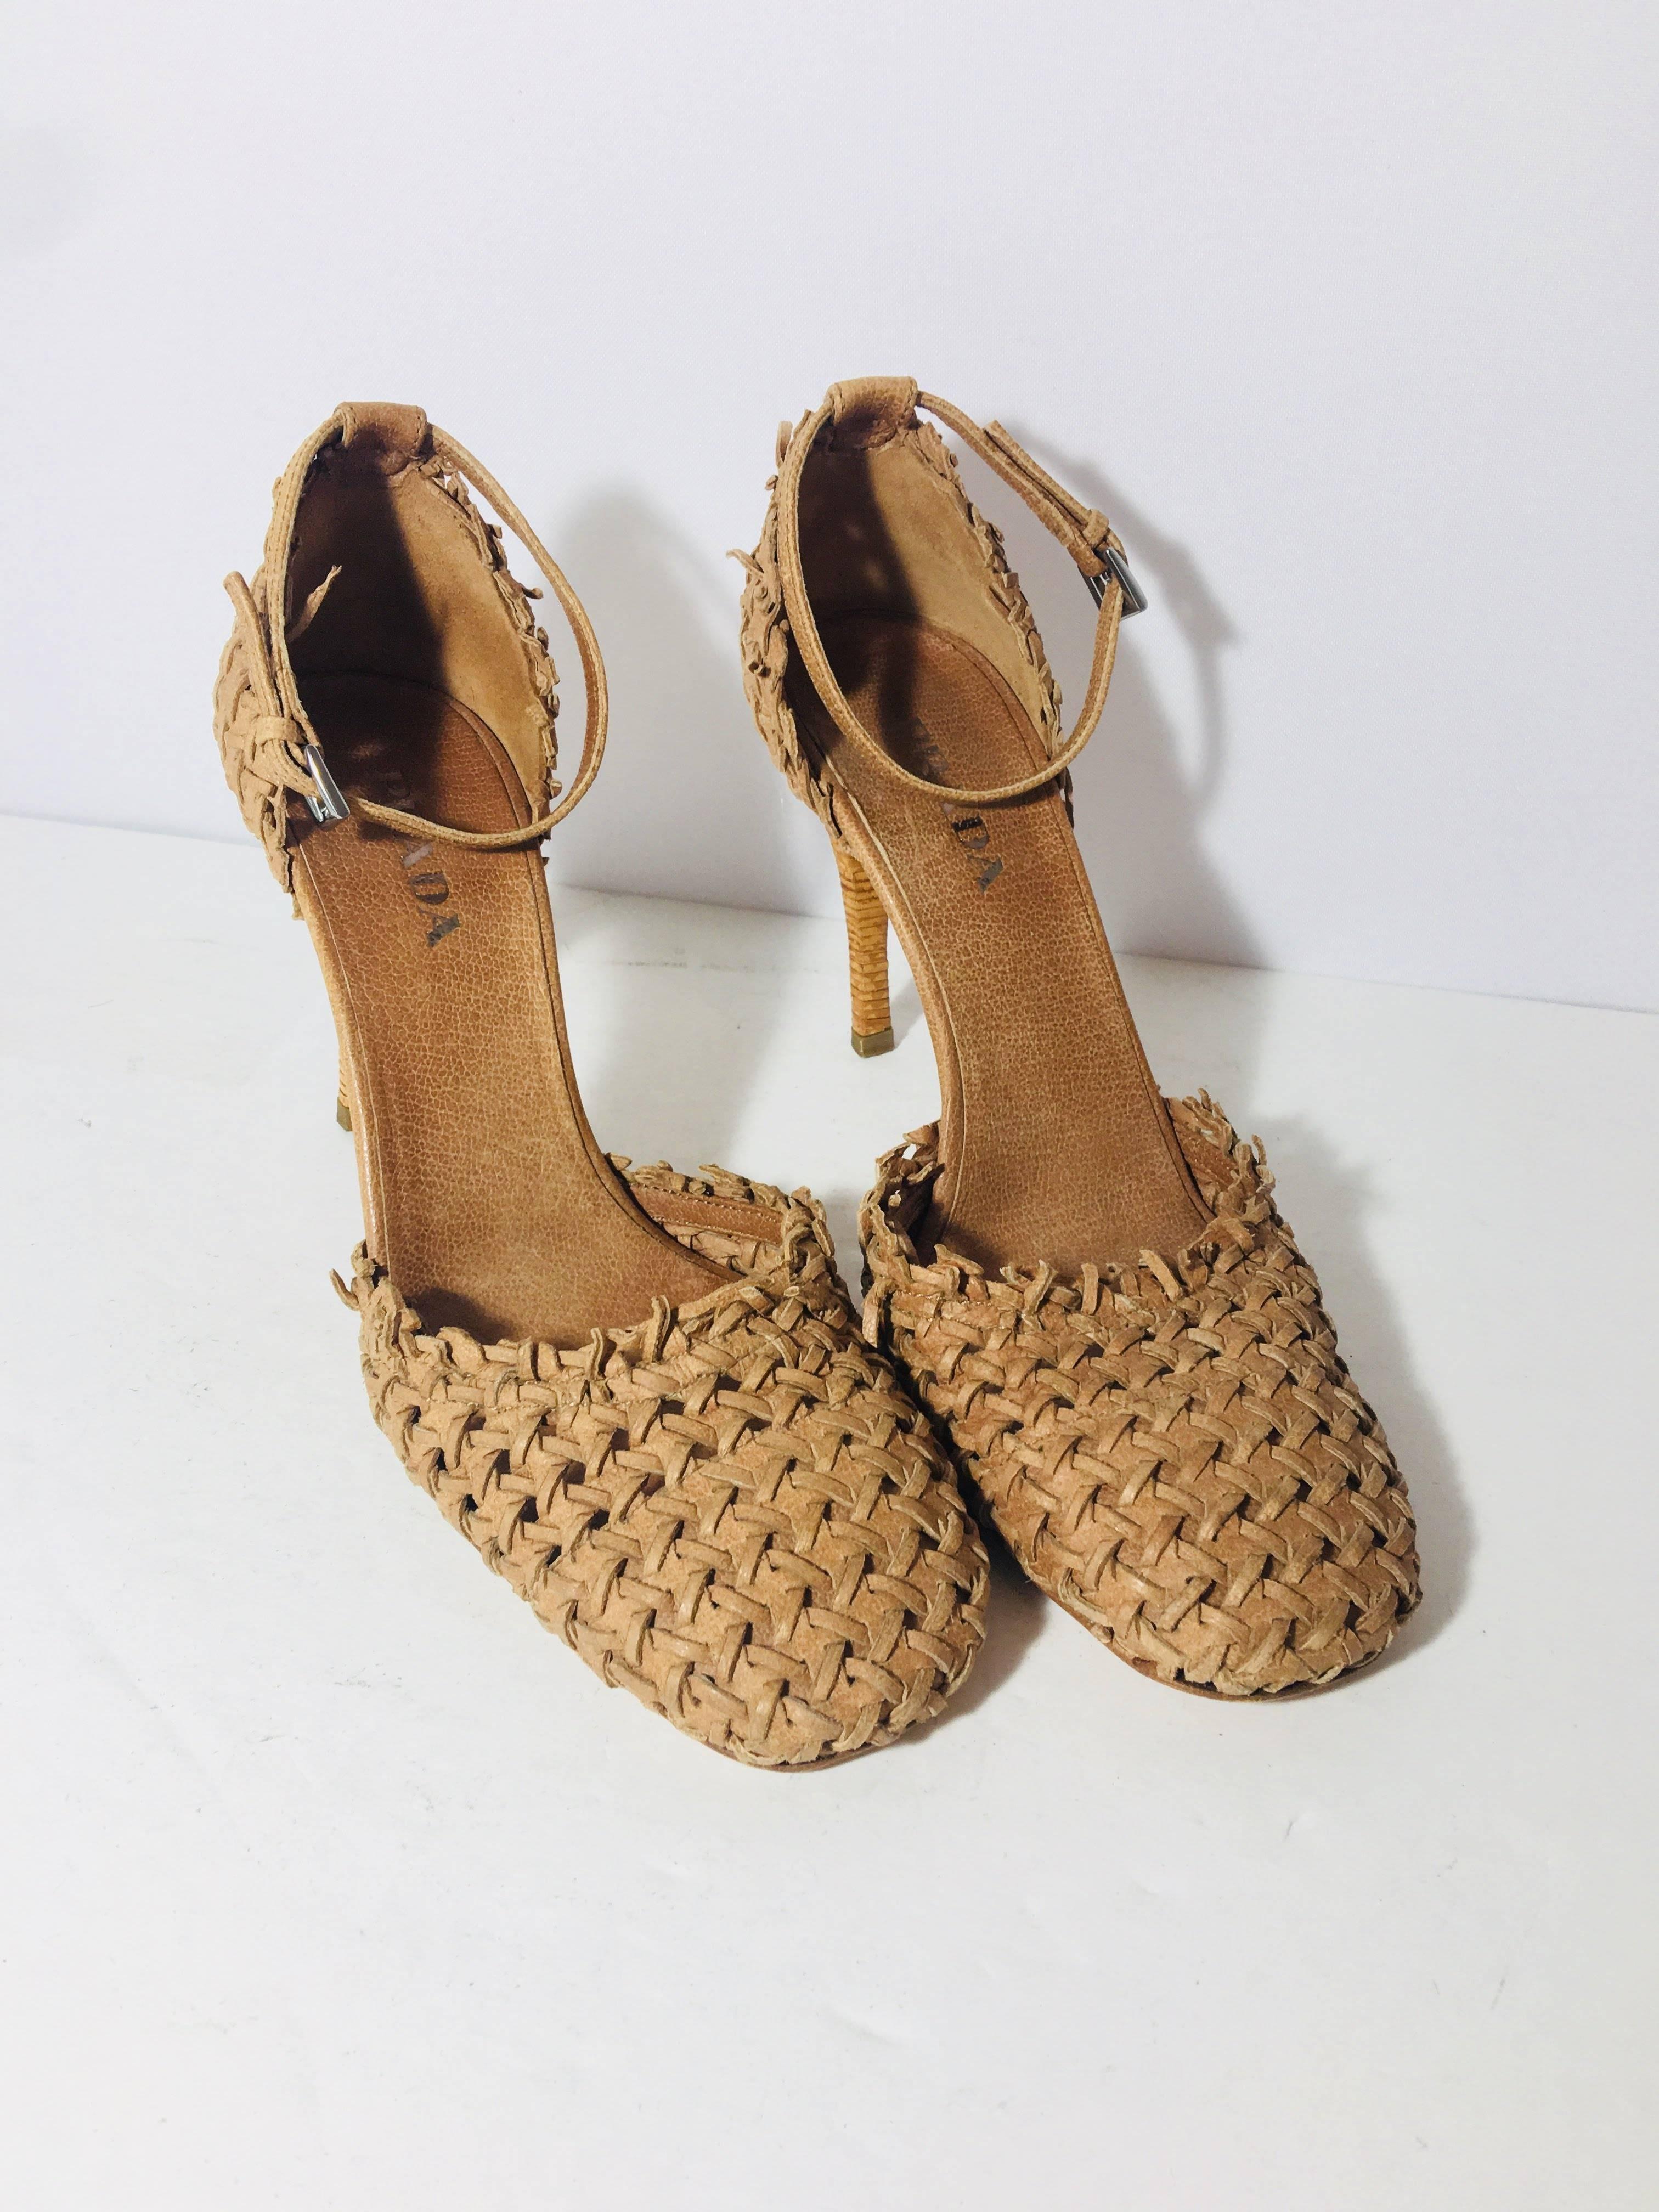 Prada Ankle Strap Woven Leather Closed Toe Heels in Camel.